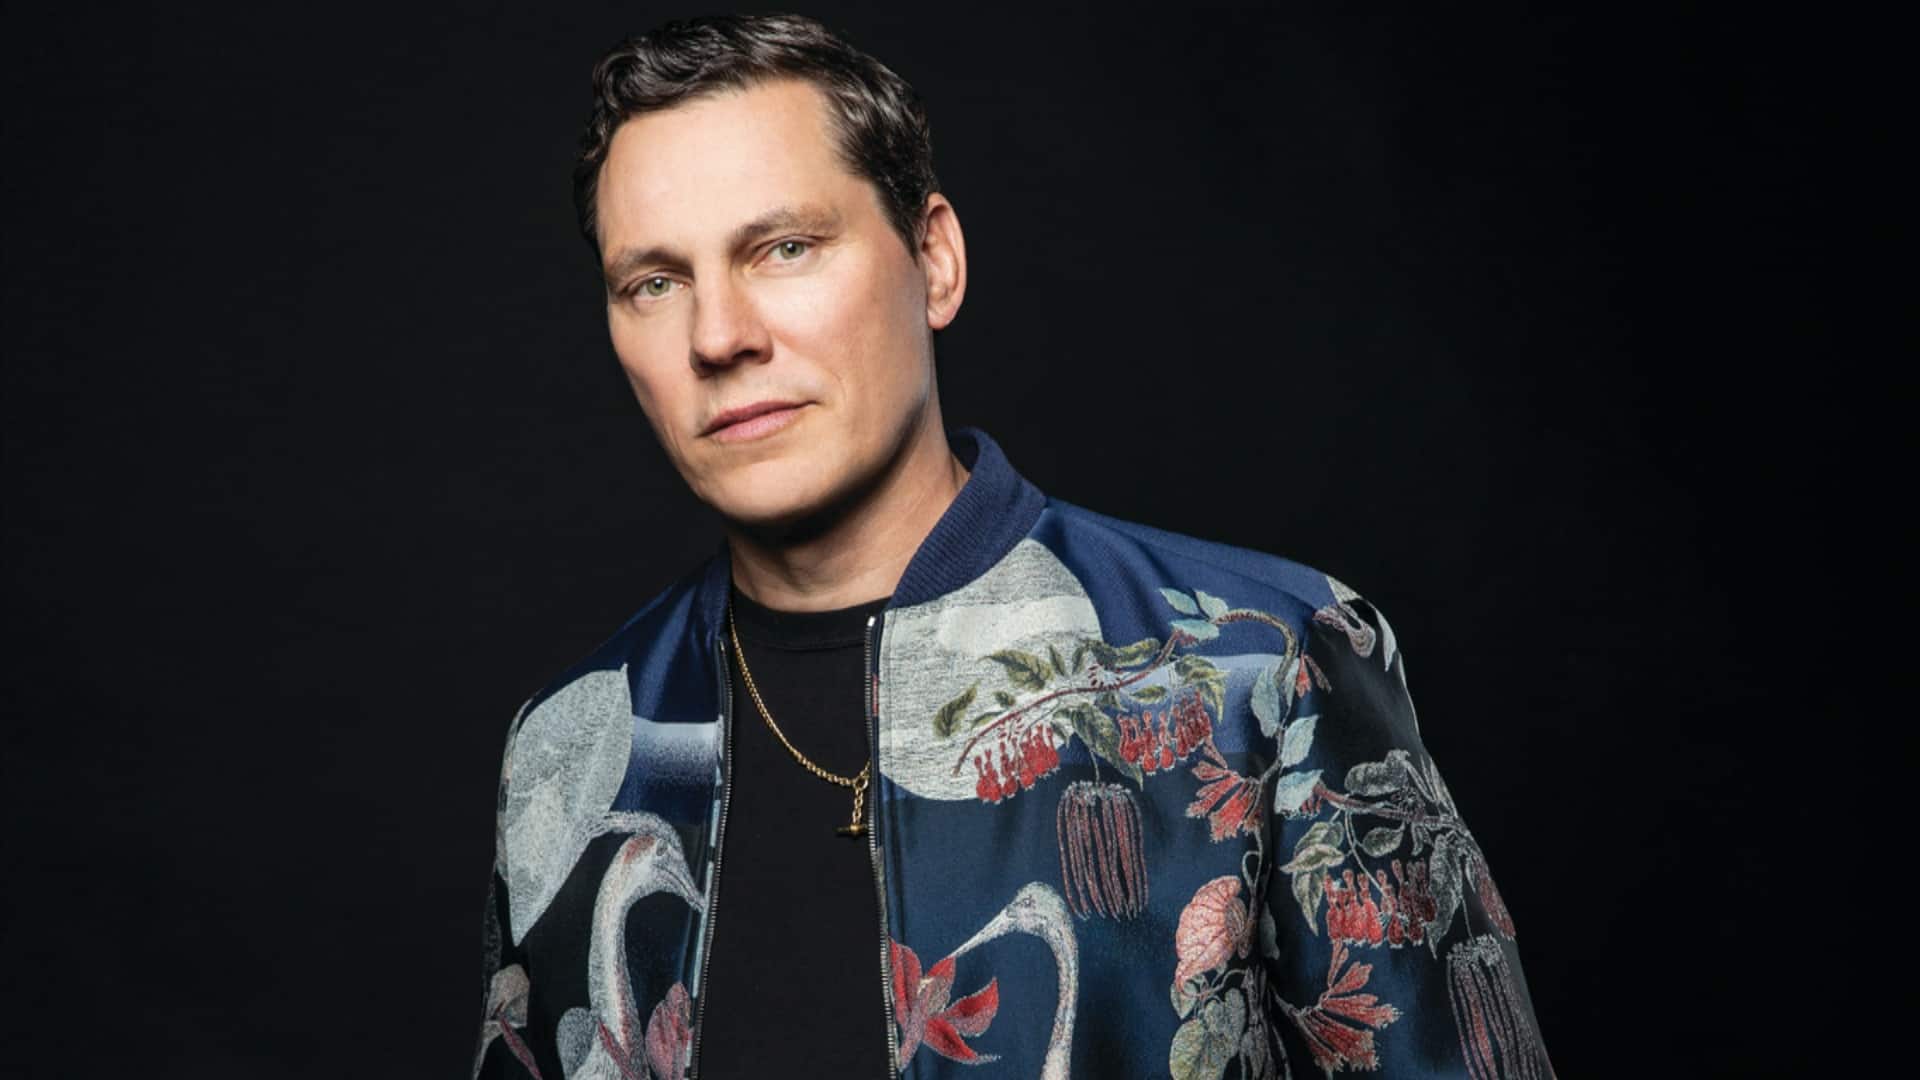 Tiësto delivers massive Mainstage set for weekend 2 of Tomorrowland